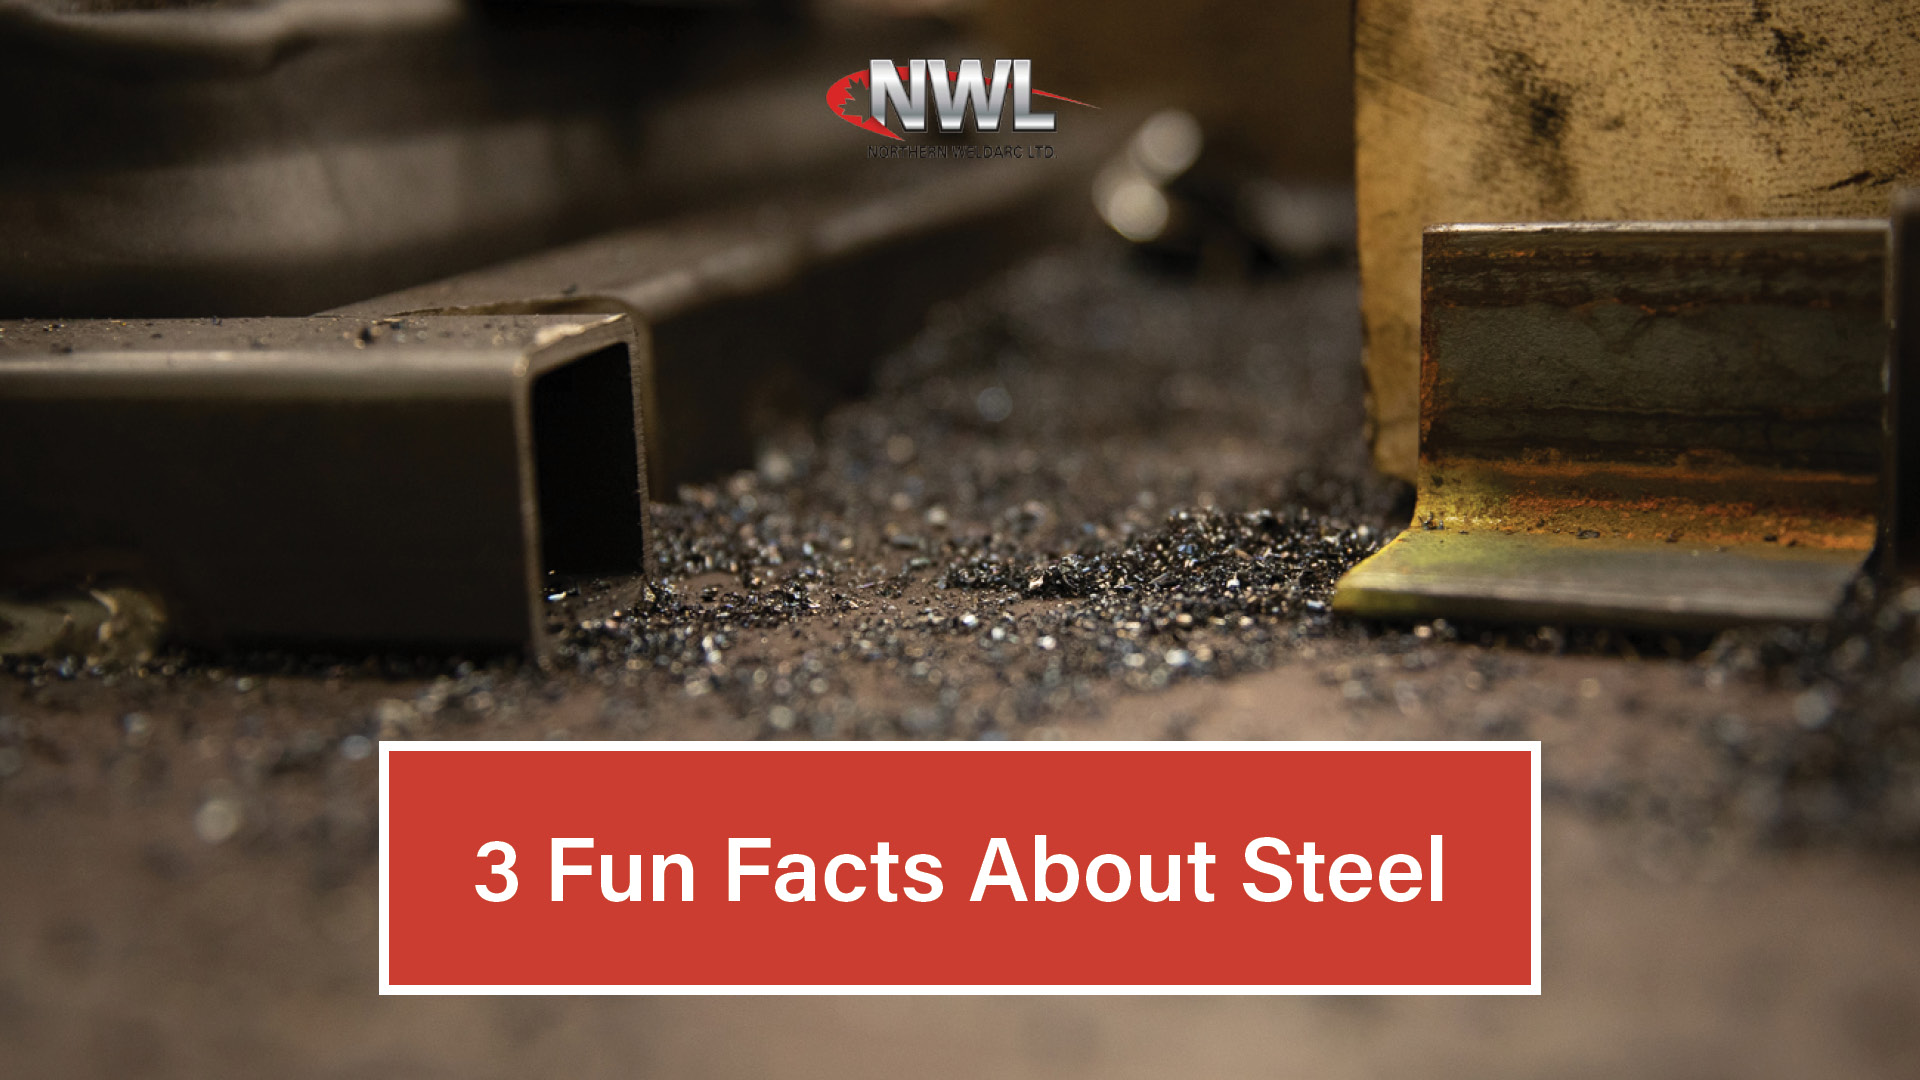 22_02-3-fun-facts-about-steel.jpg